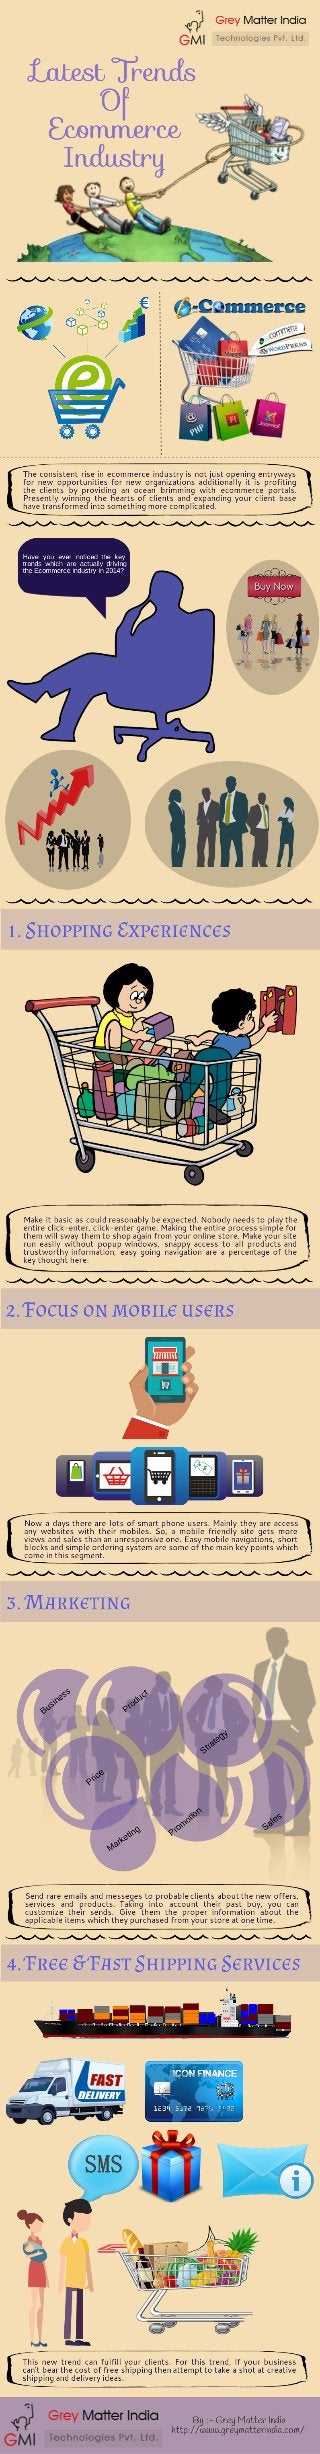 Latest Trends Of Ecommerce Industry